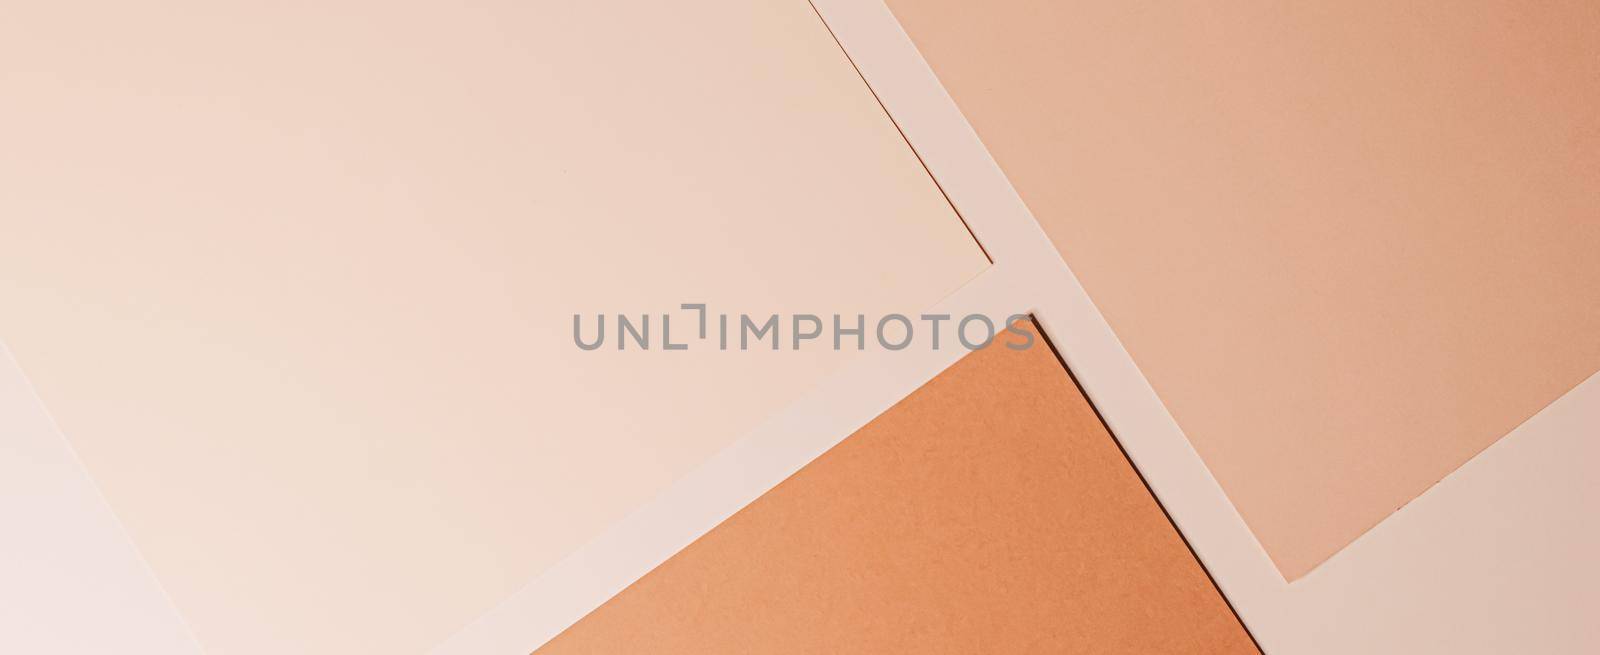 Beige and brown A4 papers as office stationery flatlay, luxury branding flat lay and brand identity design for mockup by Anneleven